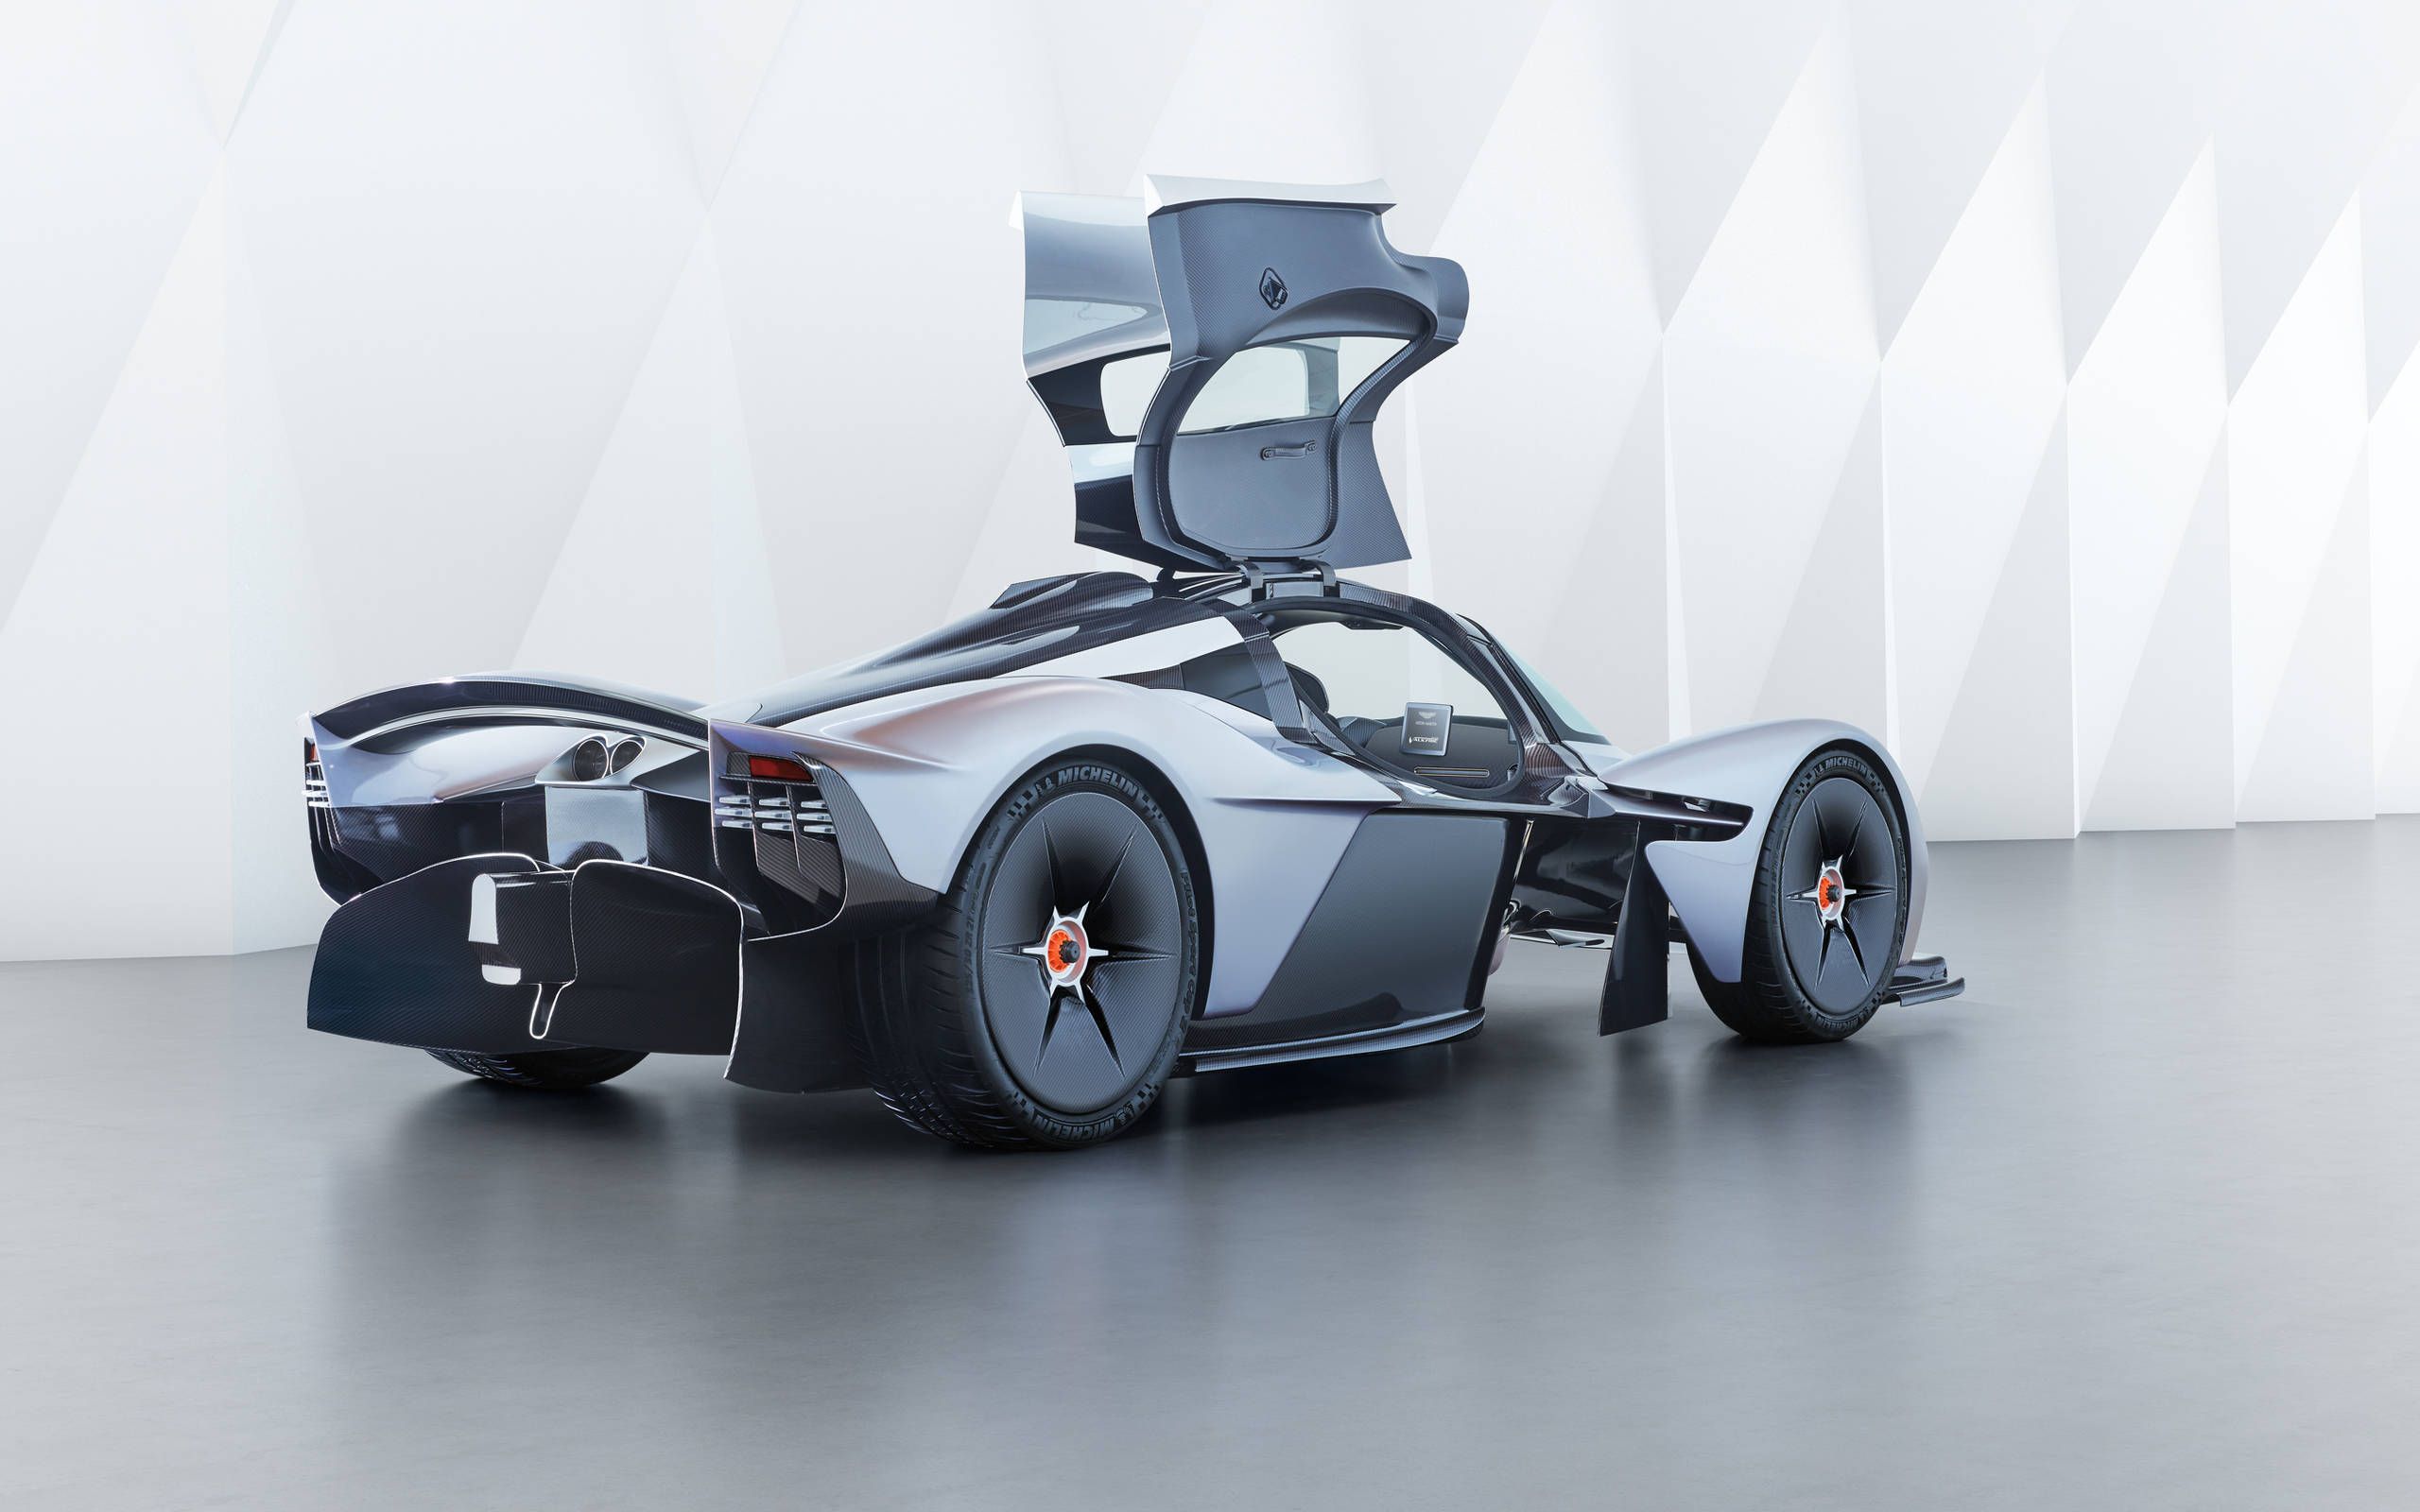 Mike Tyson Surprised The World By Giving Serena Williams A Super Rare Aston Martin Valkyrie When She Won The Title Of Greatest Tennis Player Of All Time. - Car Magazine TV